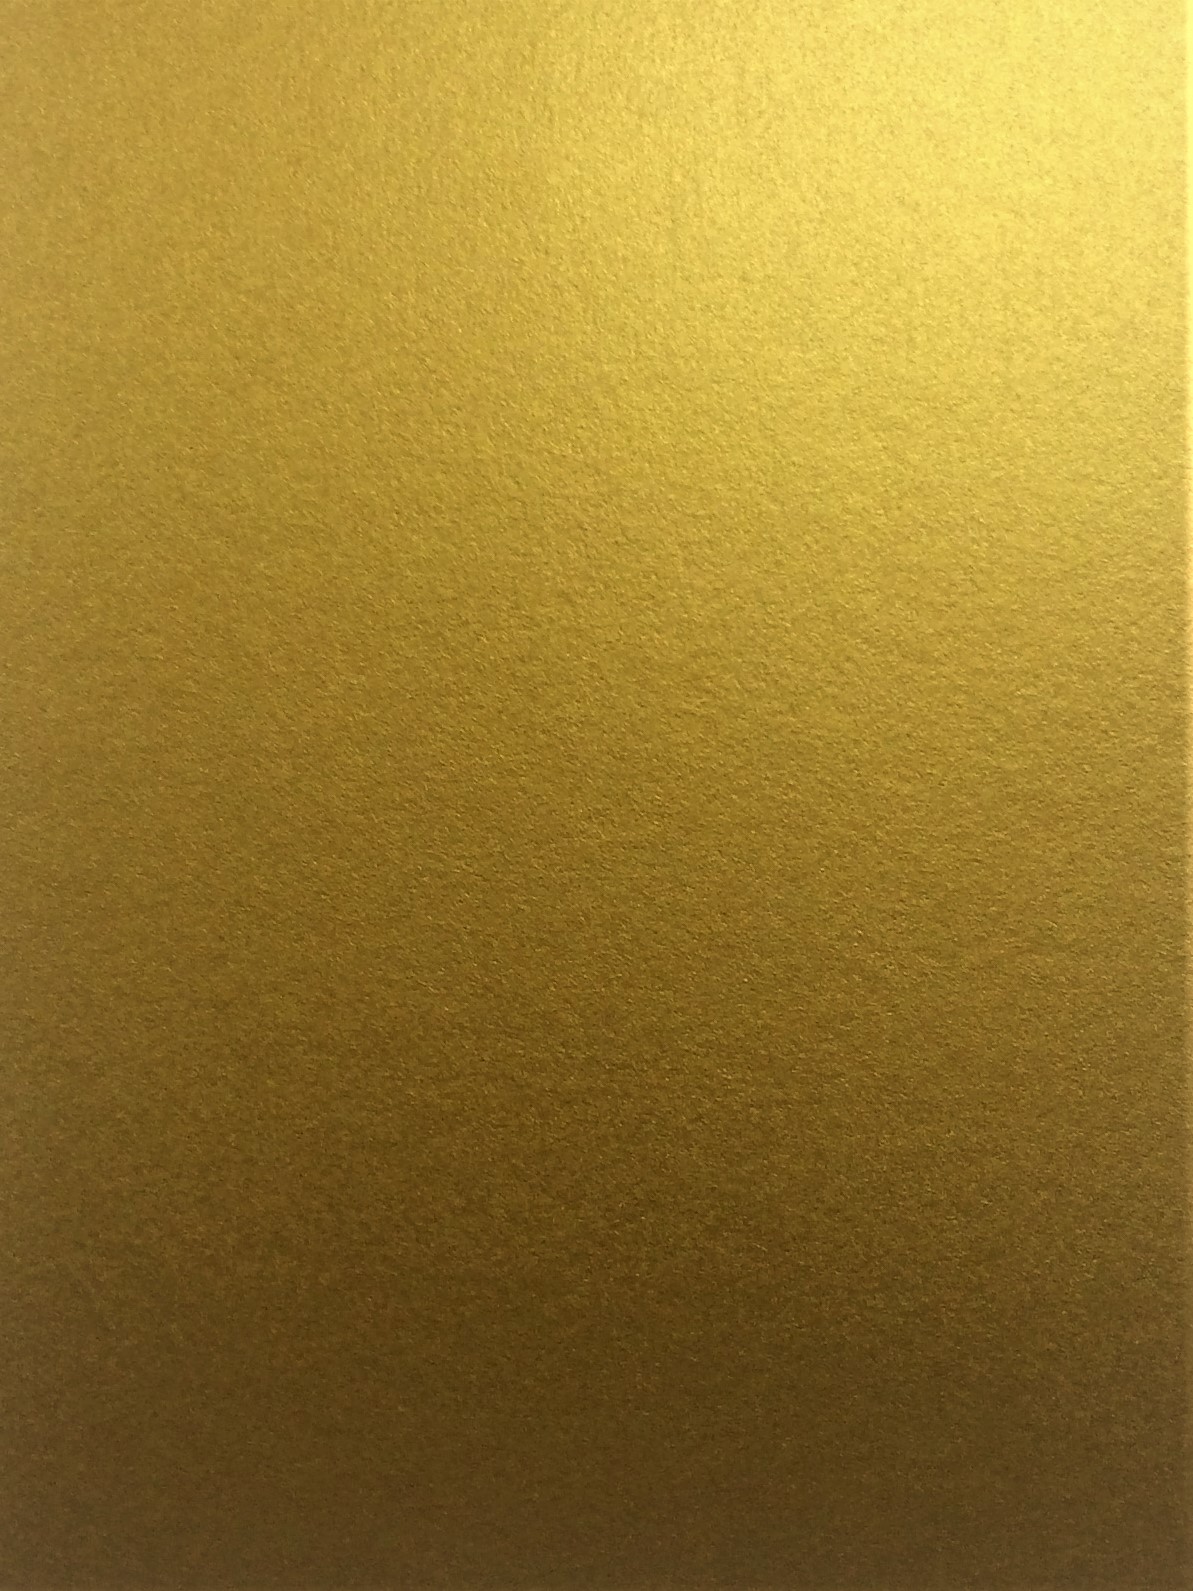 Pearla Old Gold (Paper) Amazing Paper